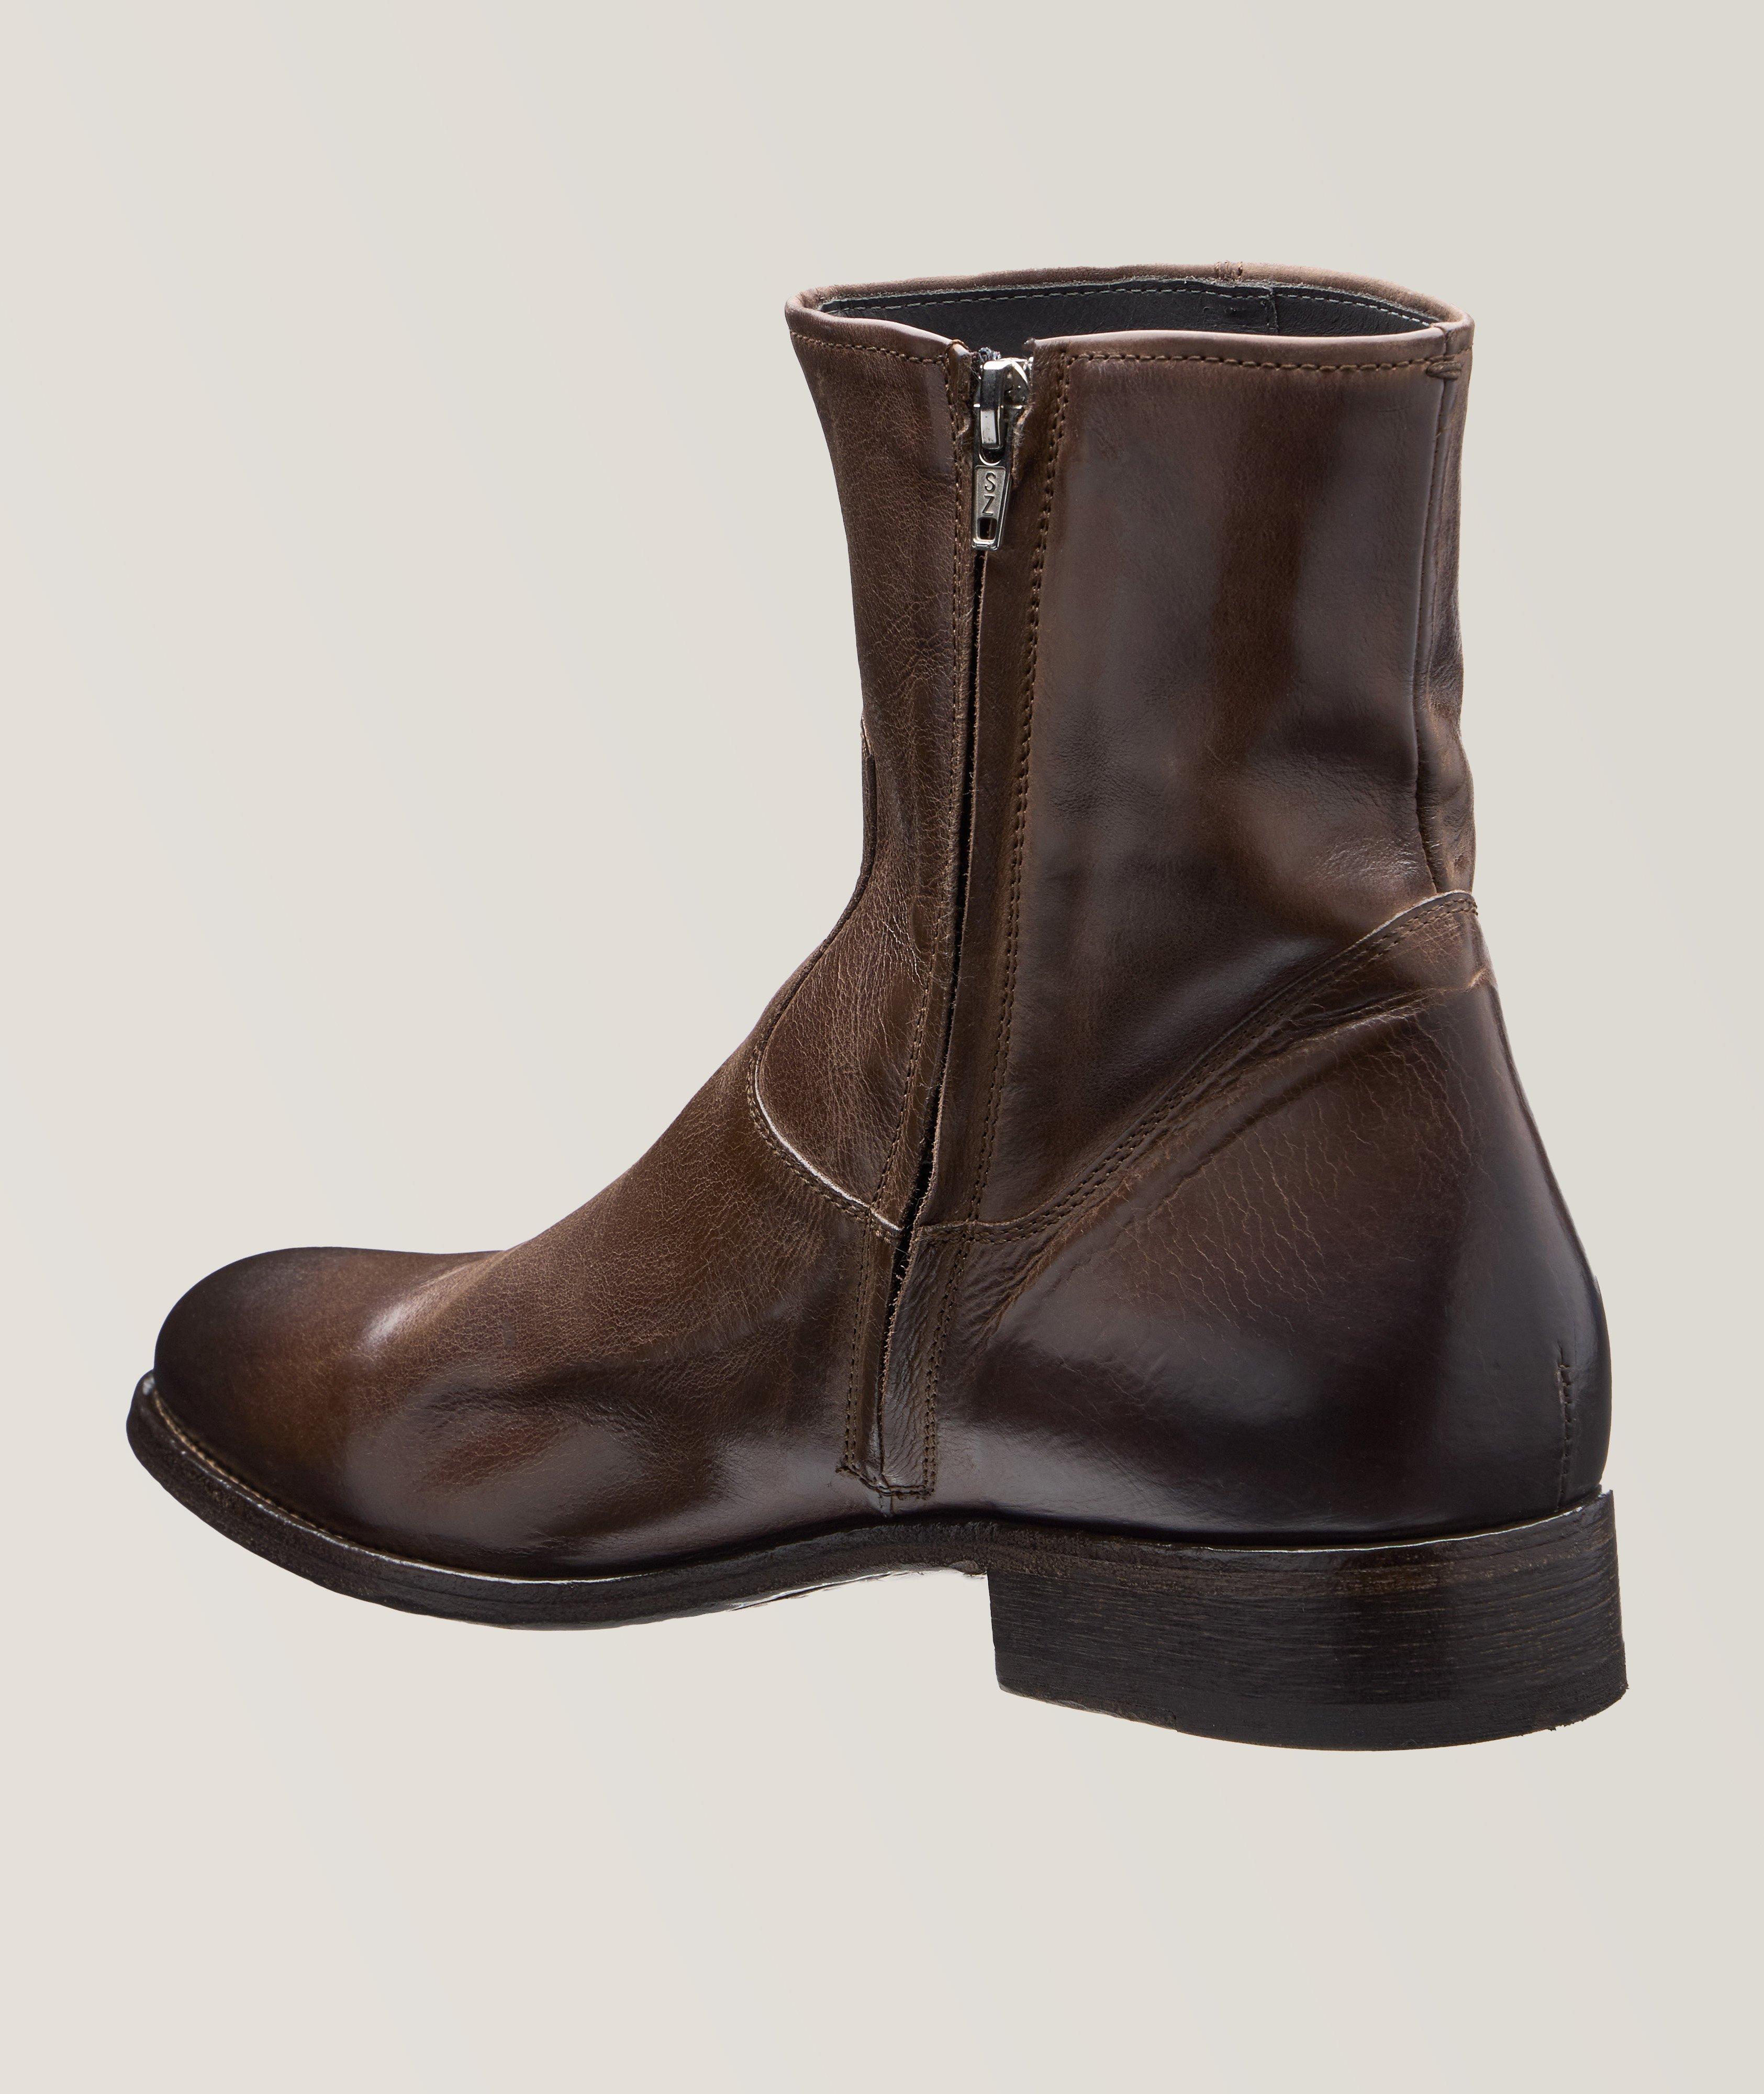 Belvedere Leather Western Boots image 1